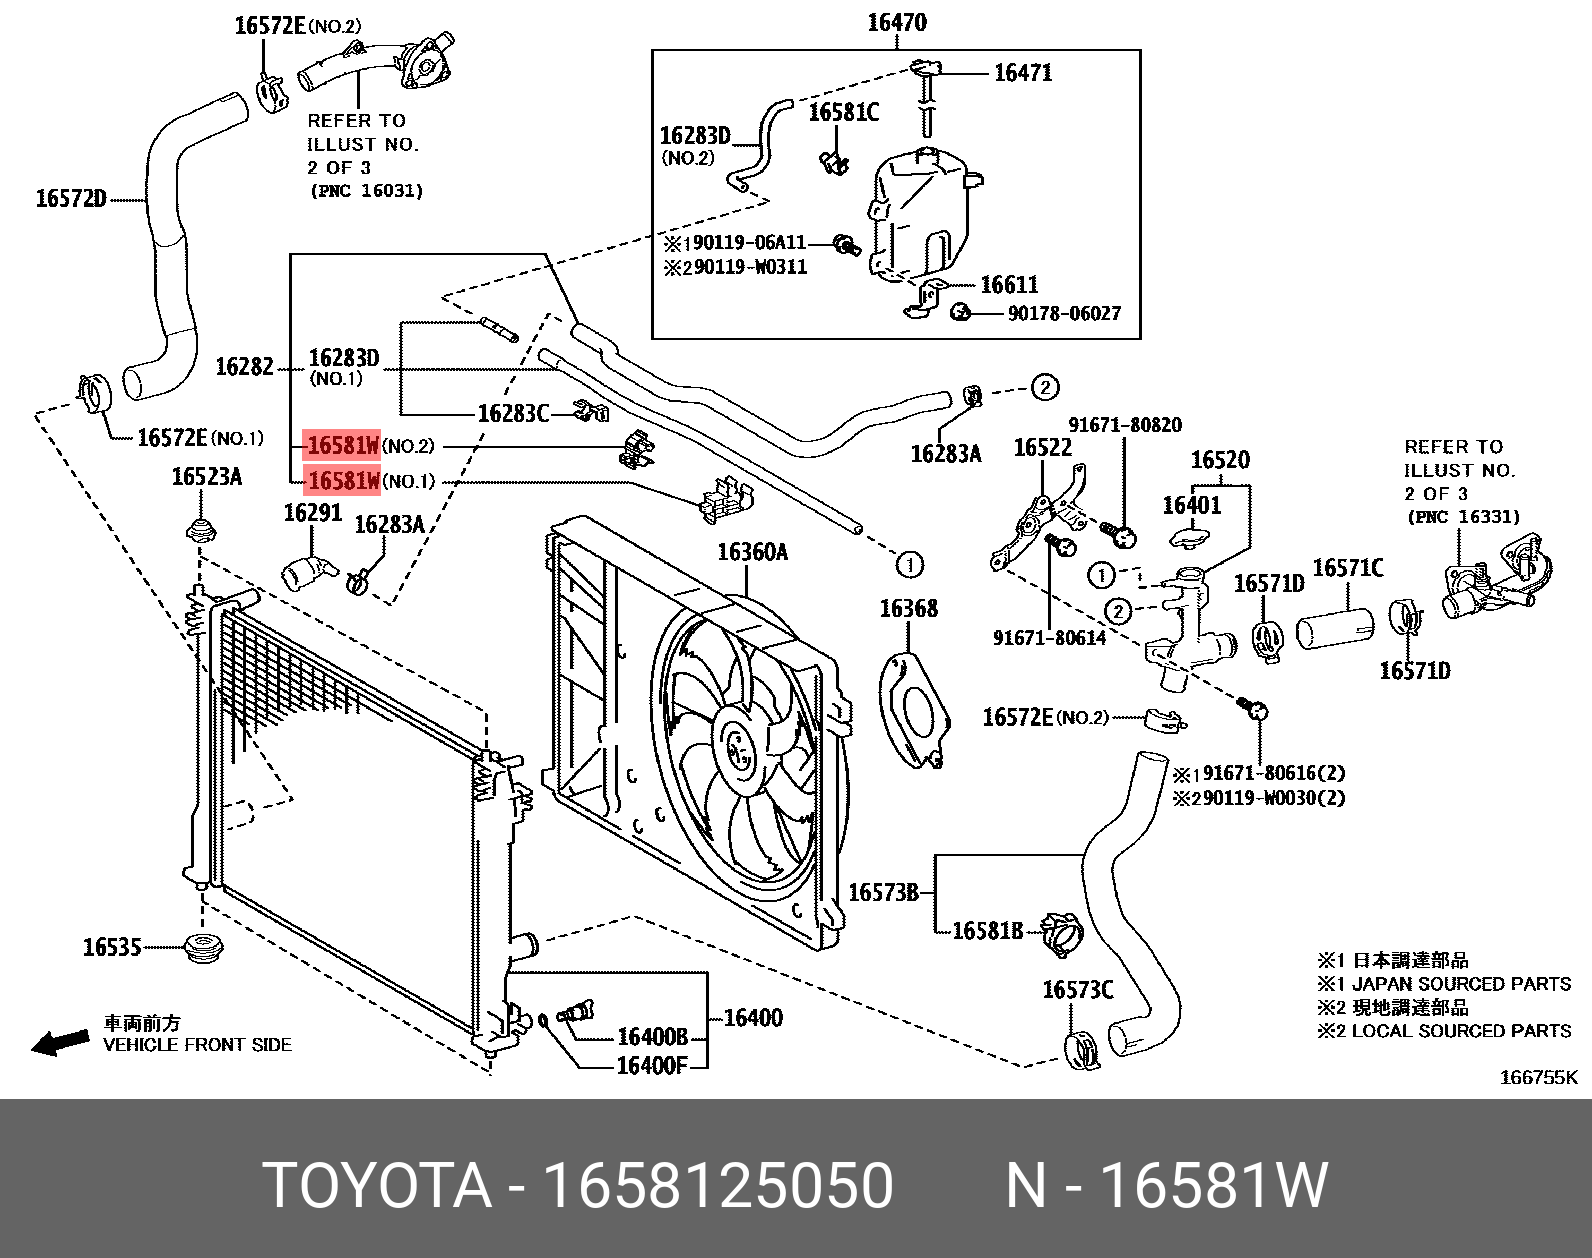 CAMRY 201706-, CLAMP OR CLIP(FOR WATER BY-PASS HOSE)